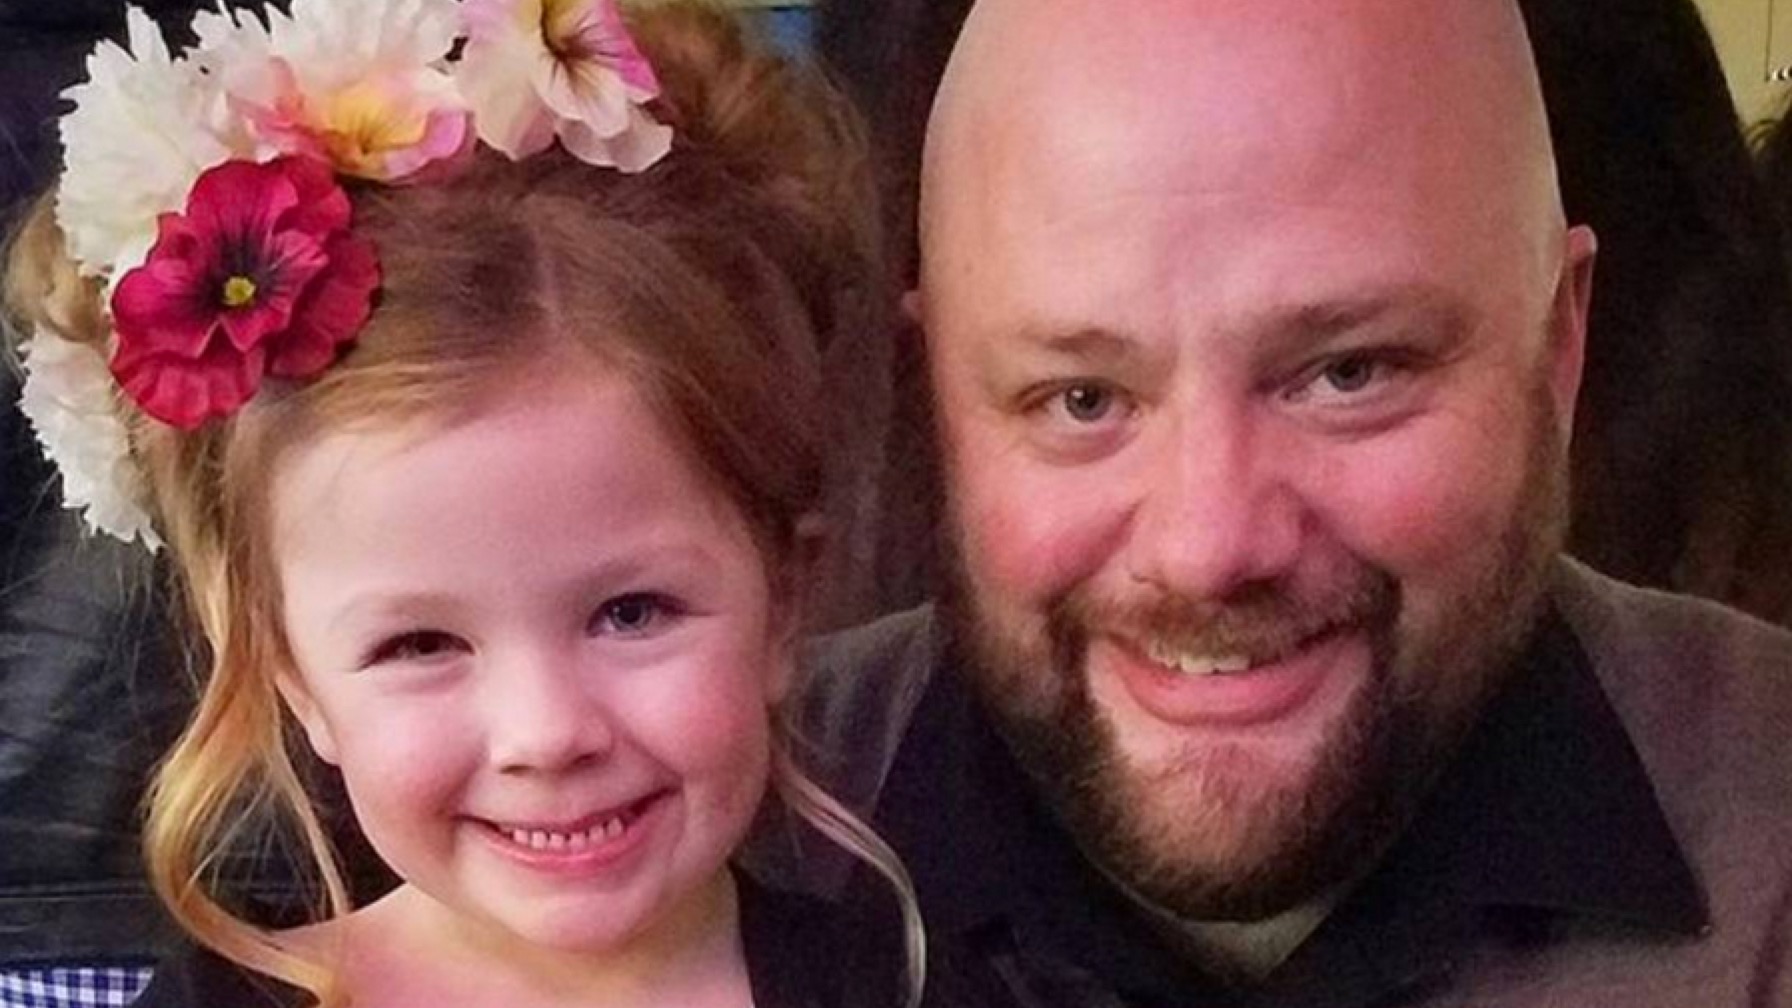 Single Father Known As 'The Hair Dad' Uses Viral Fame To Help Other Dads And Daughters